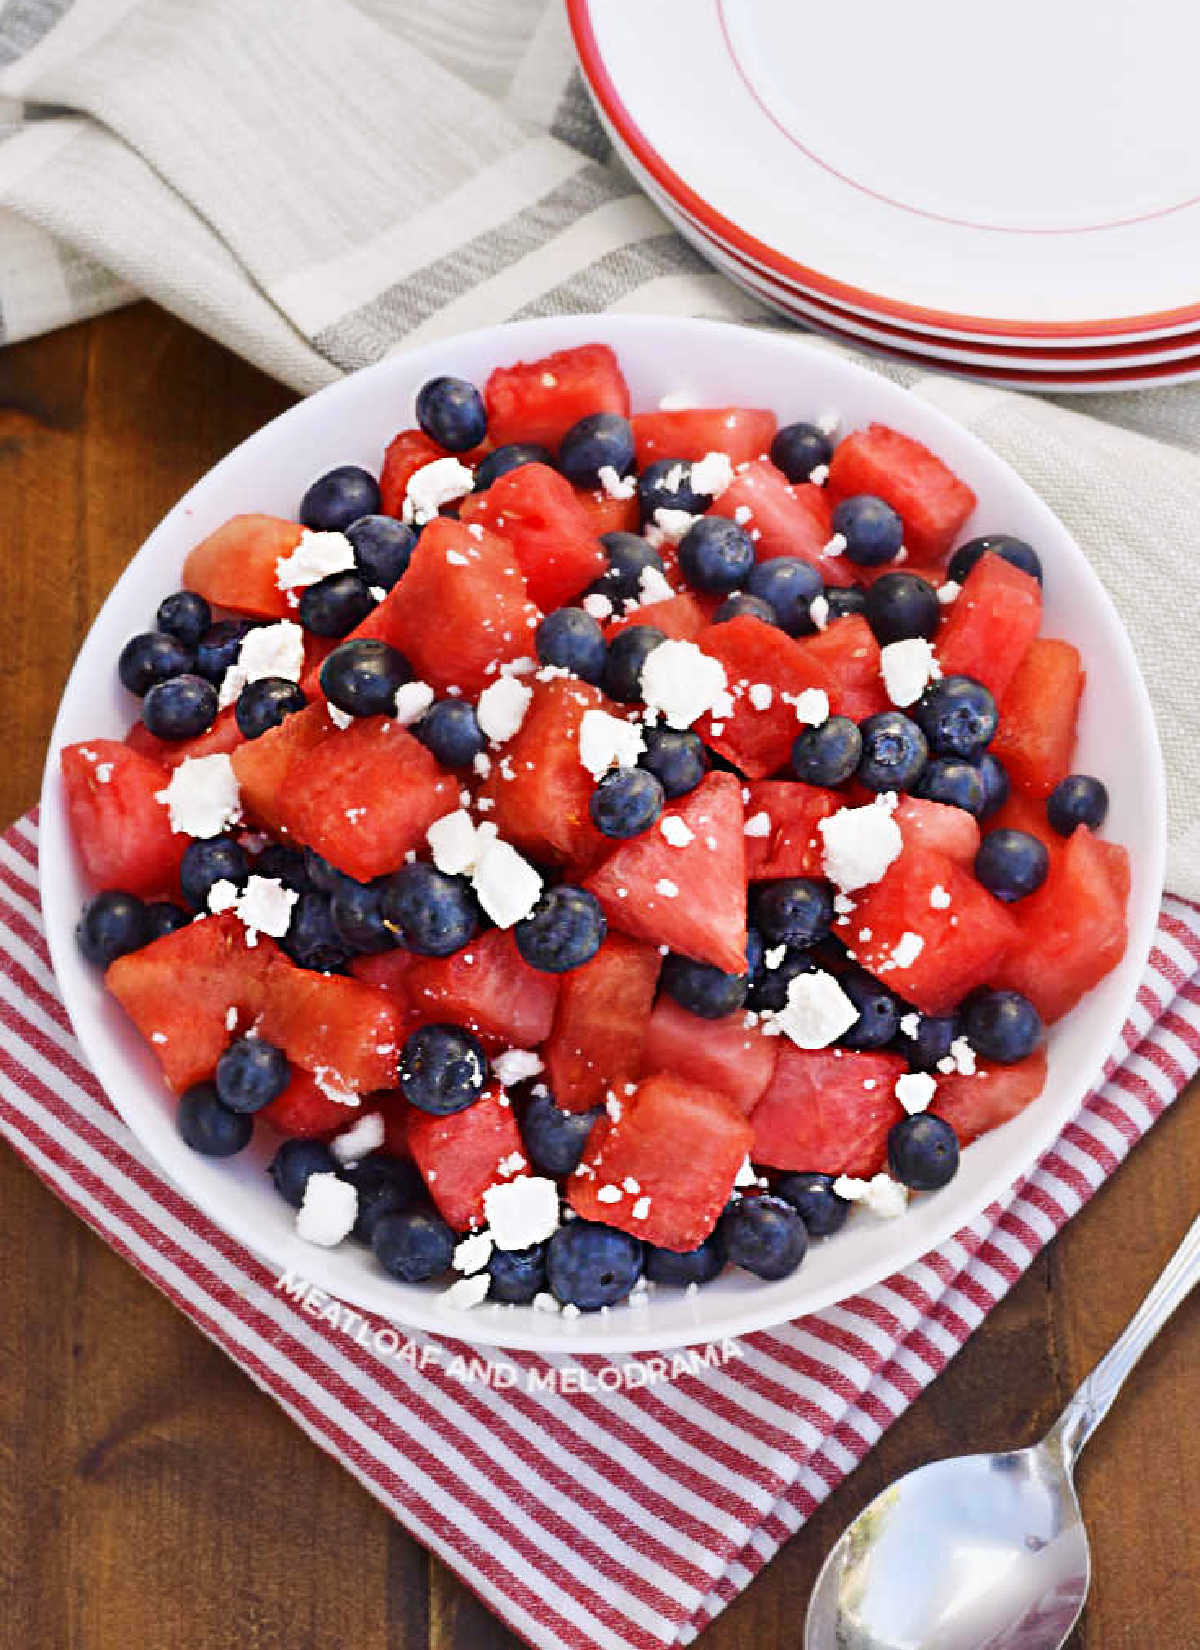 watermelon feta salad with blueberries in a white serving bowl on the table.